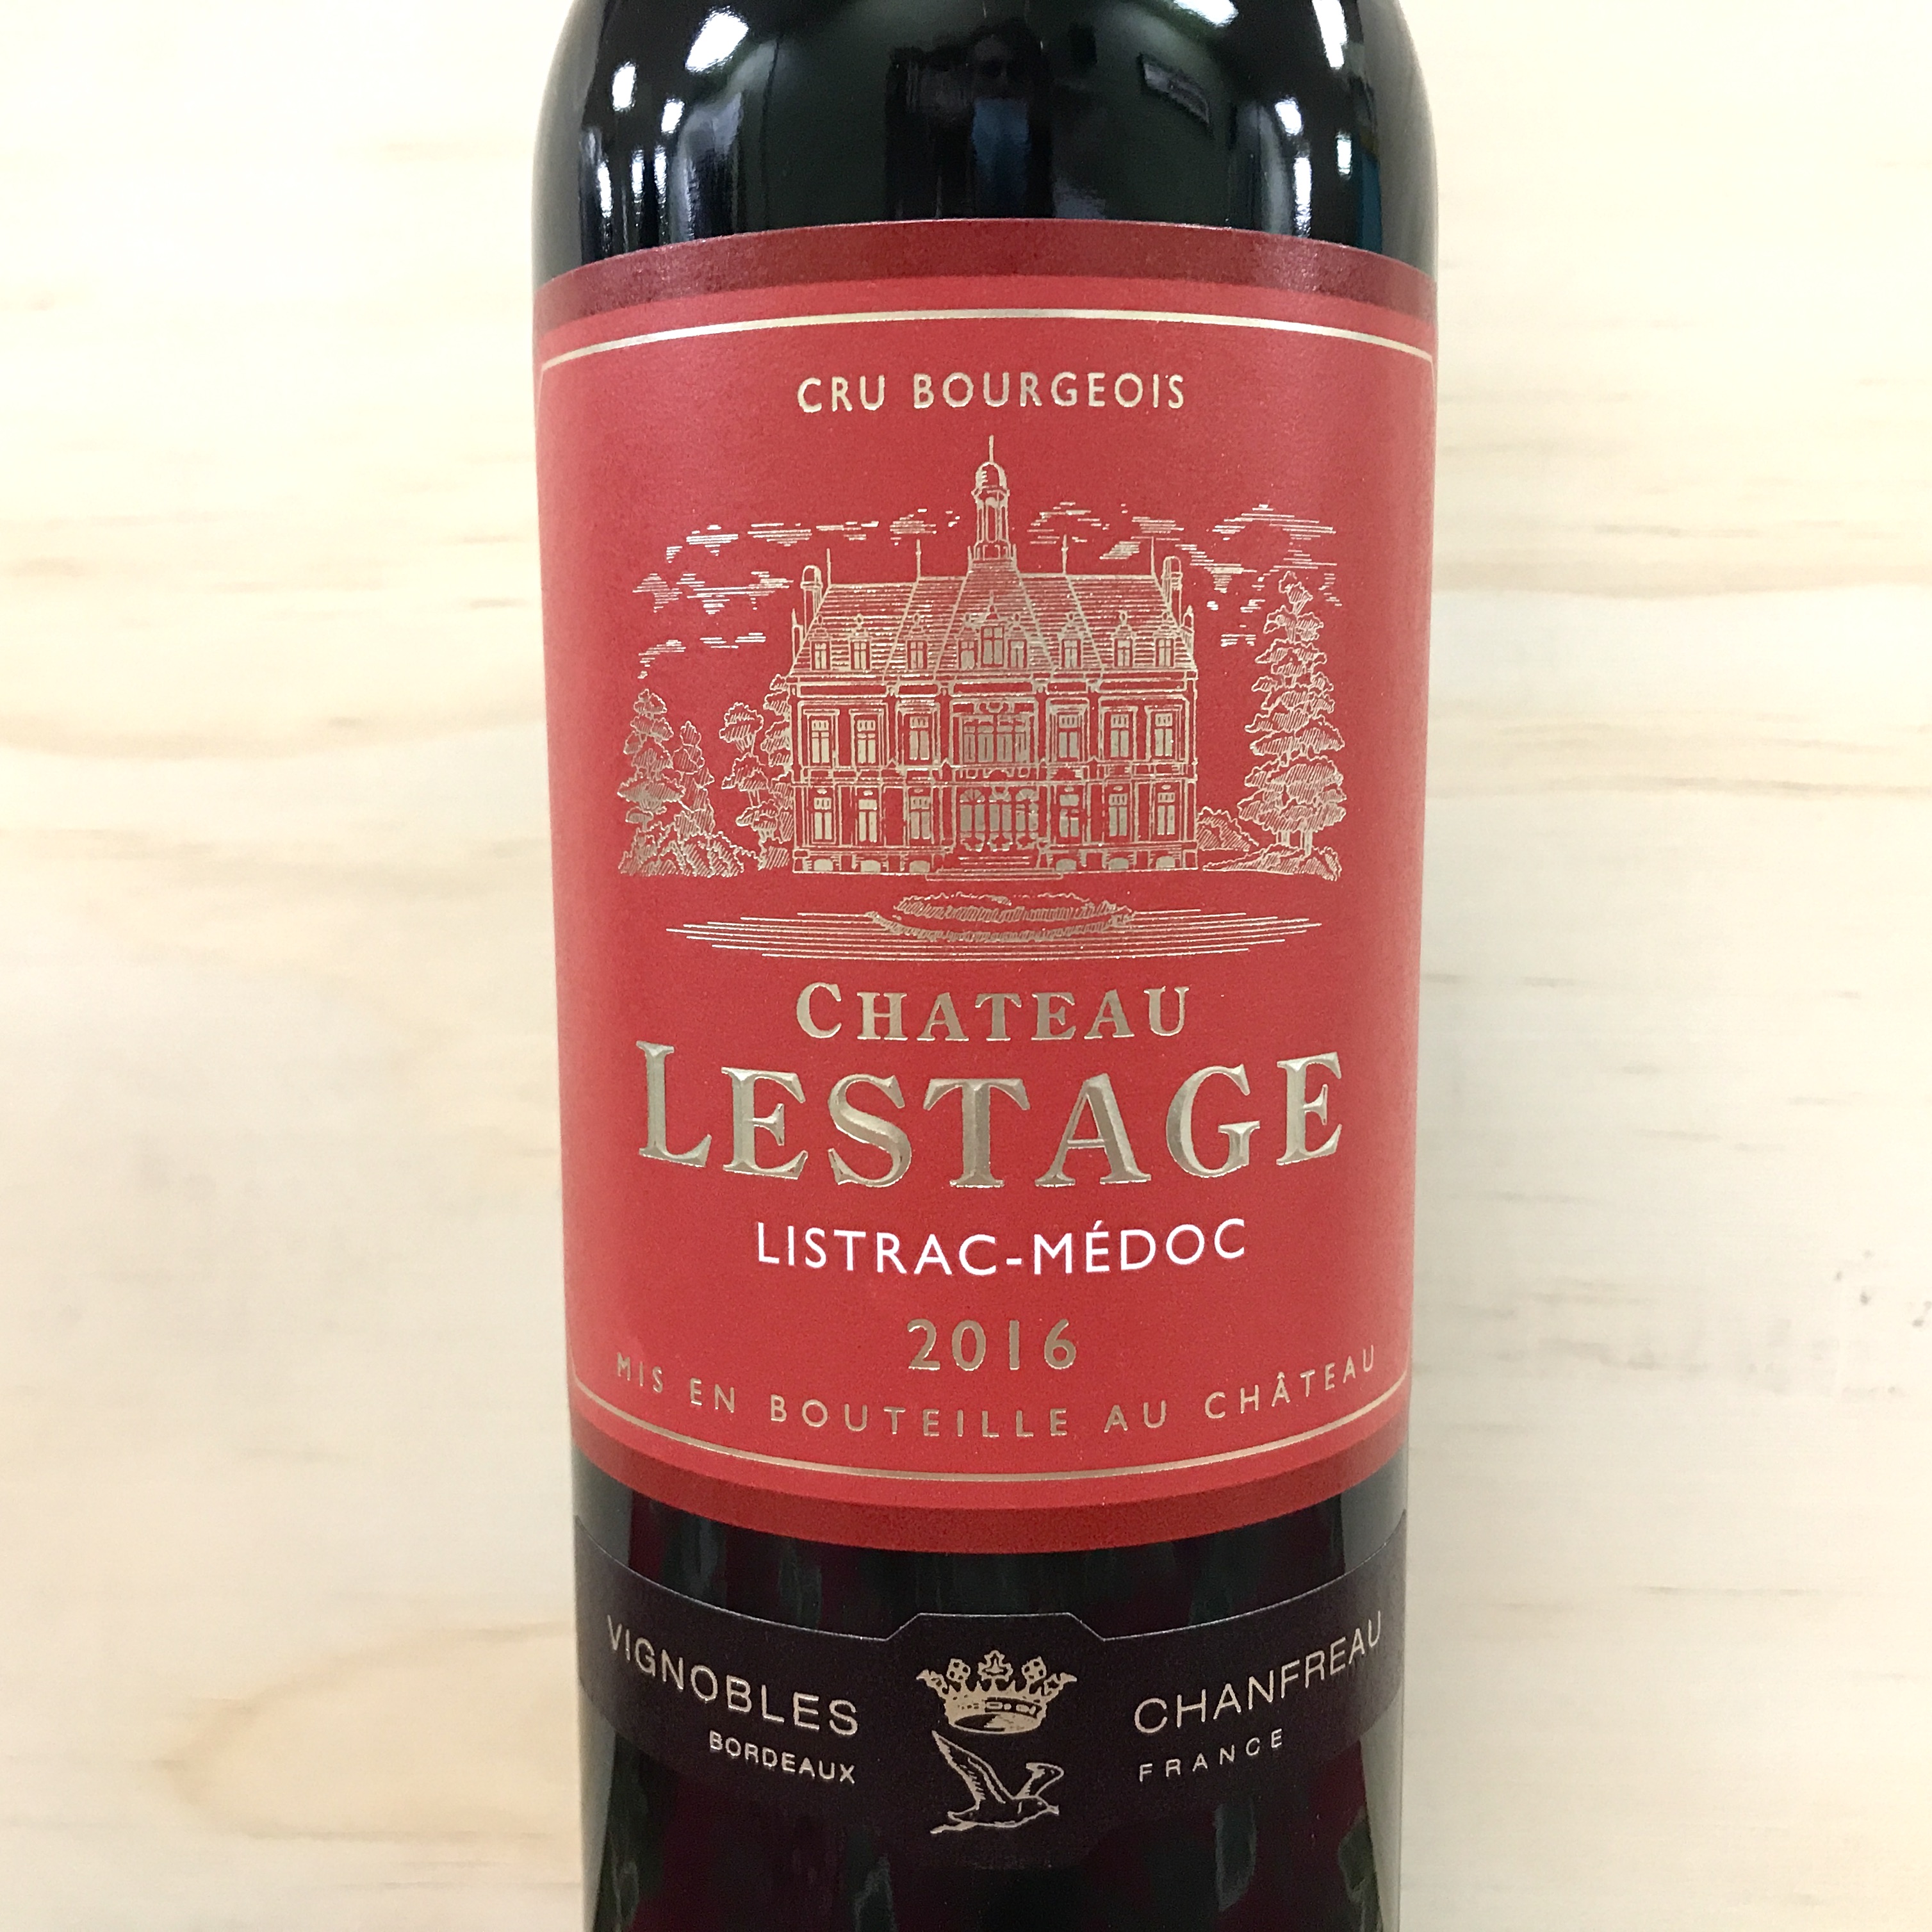 Chateau Lestage Listrac-Medoc rouge 2016